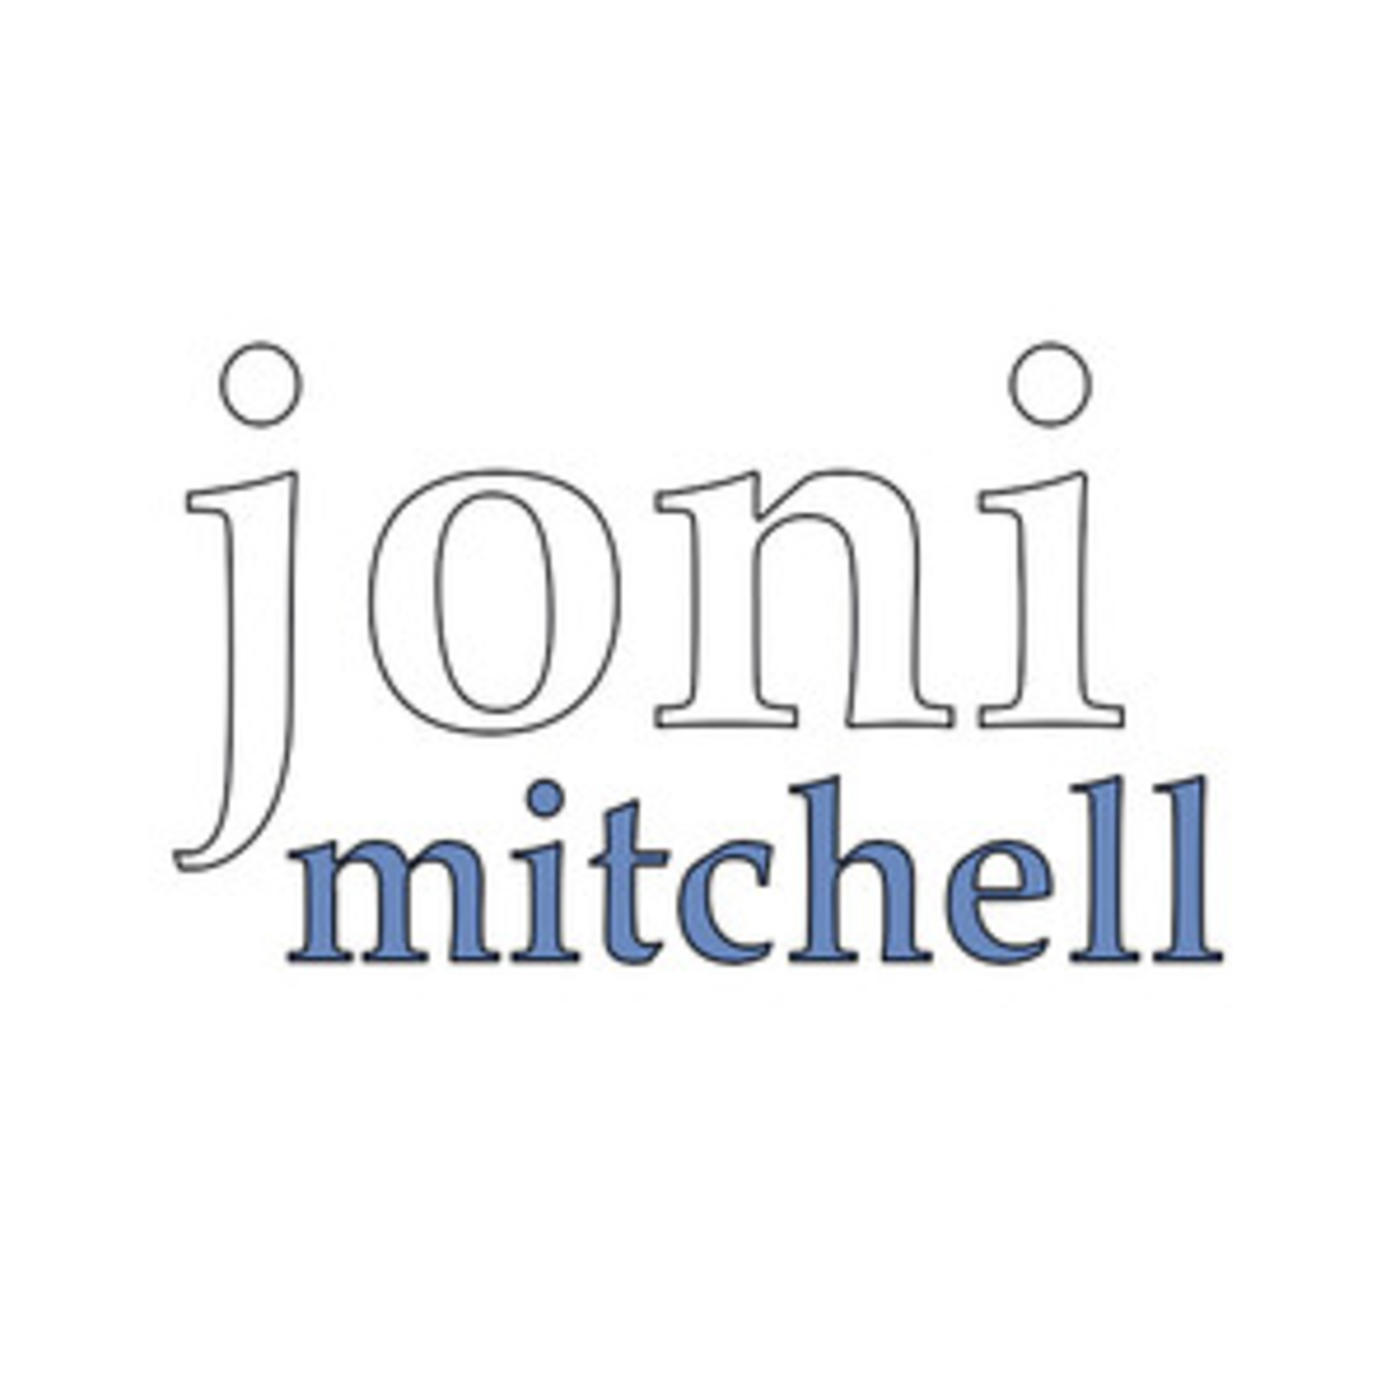 Joni Mitchell - Official Playlist - Big Yellow Taxi, A Case Of You, Conversation, Both Sides Now